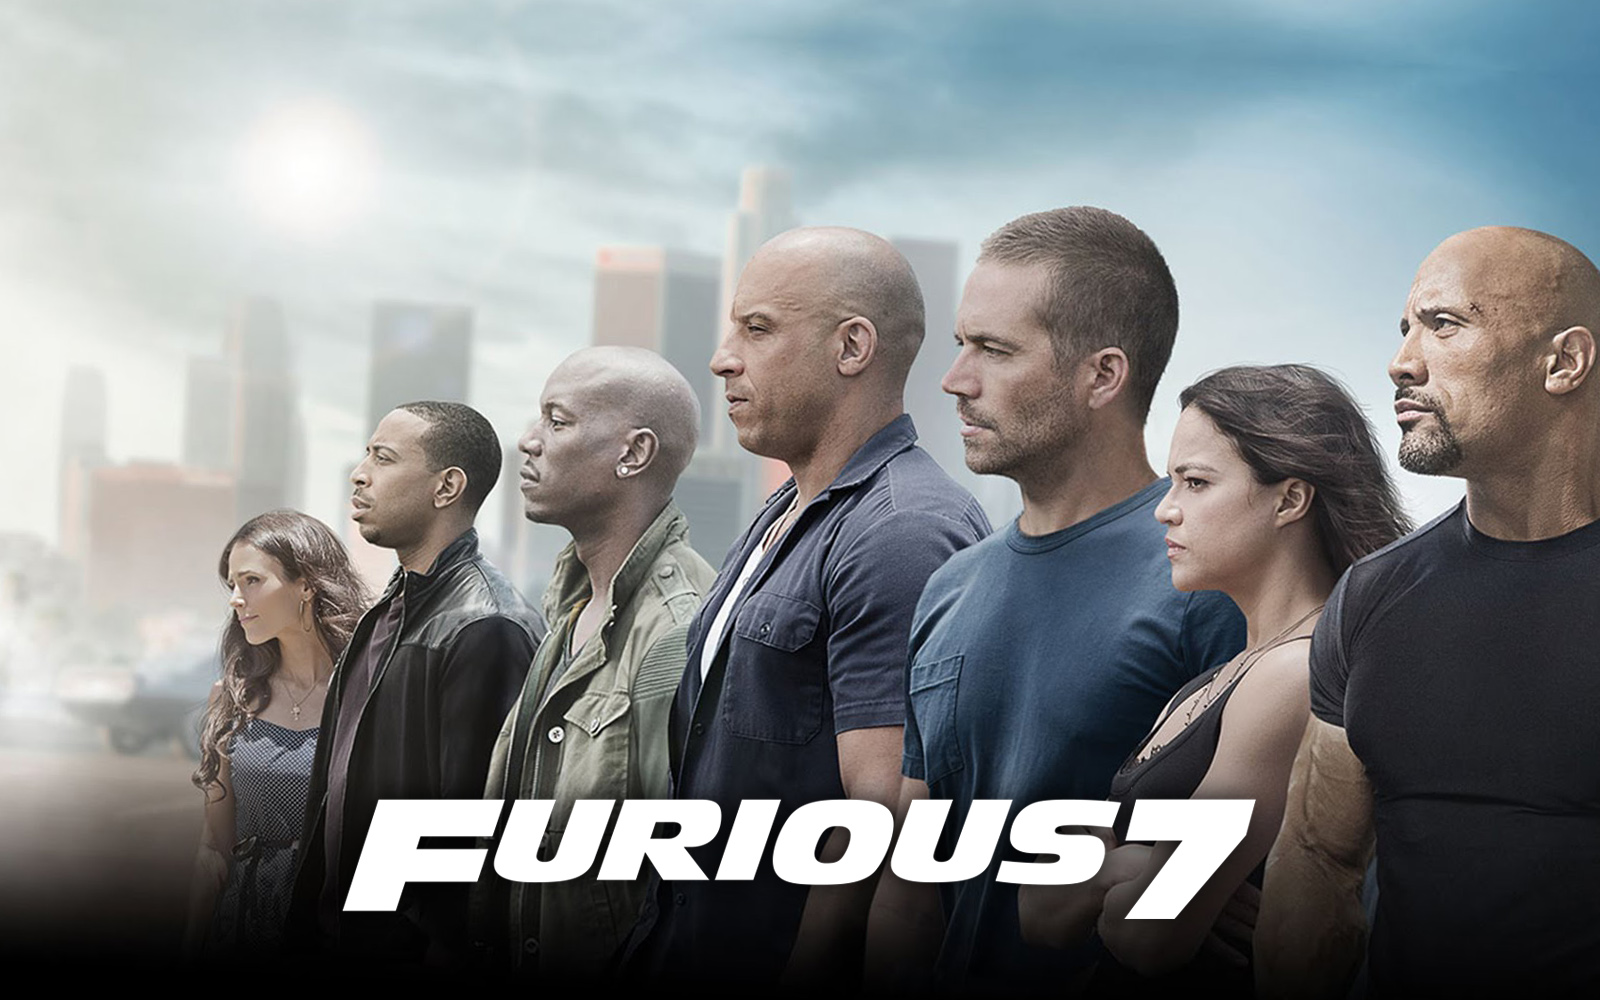 Watch Furious 7 online - All 7 Fast Furious movies